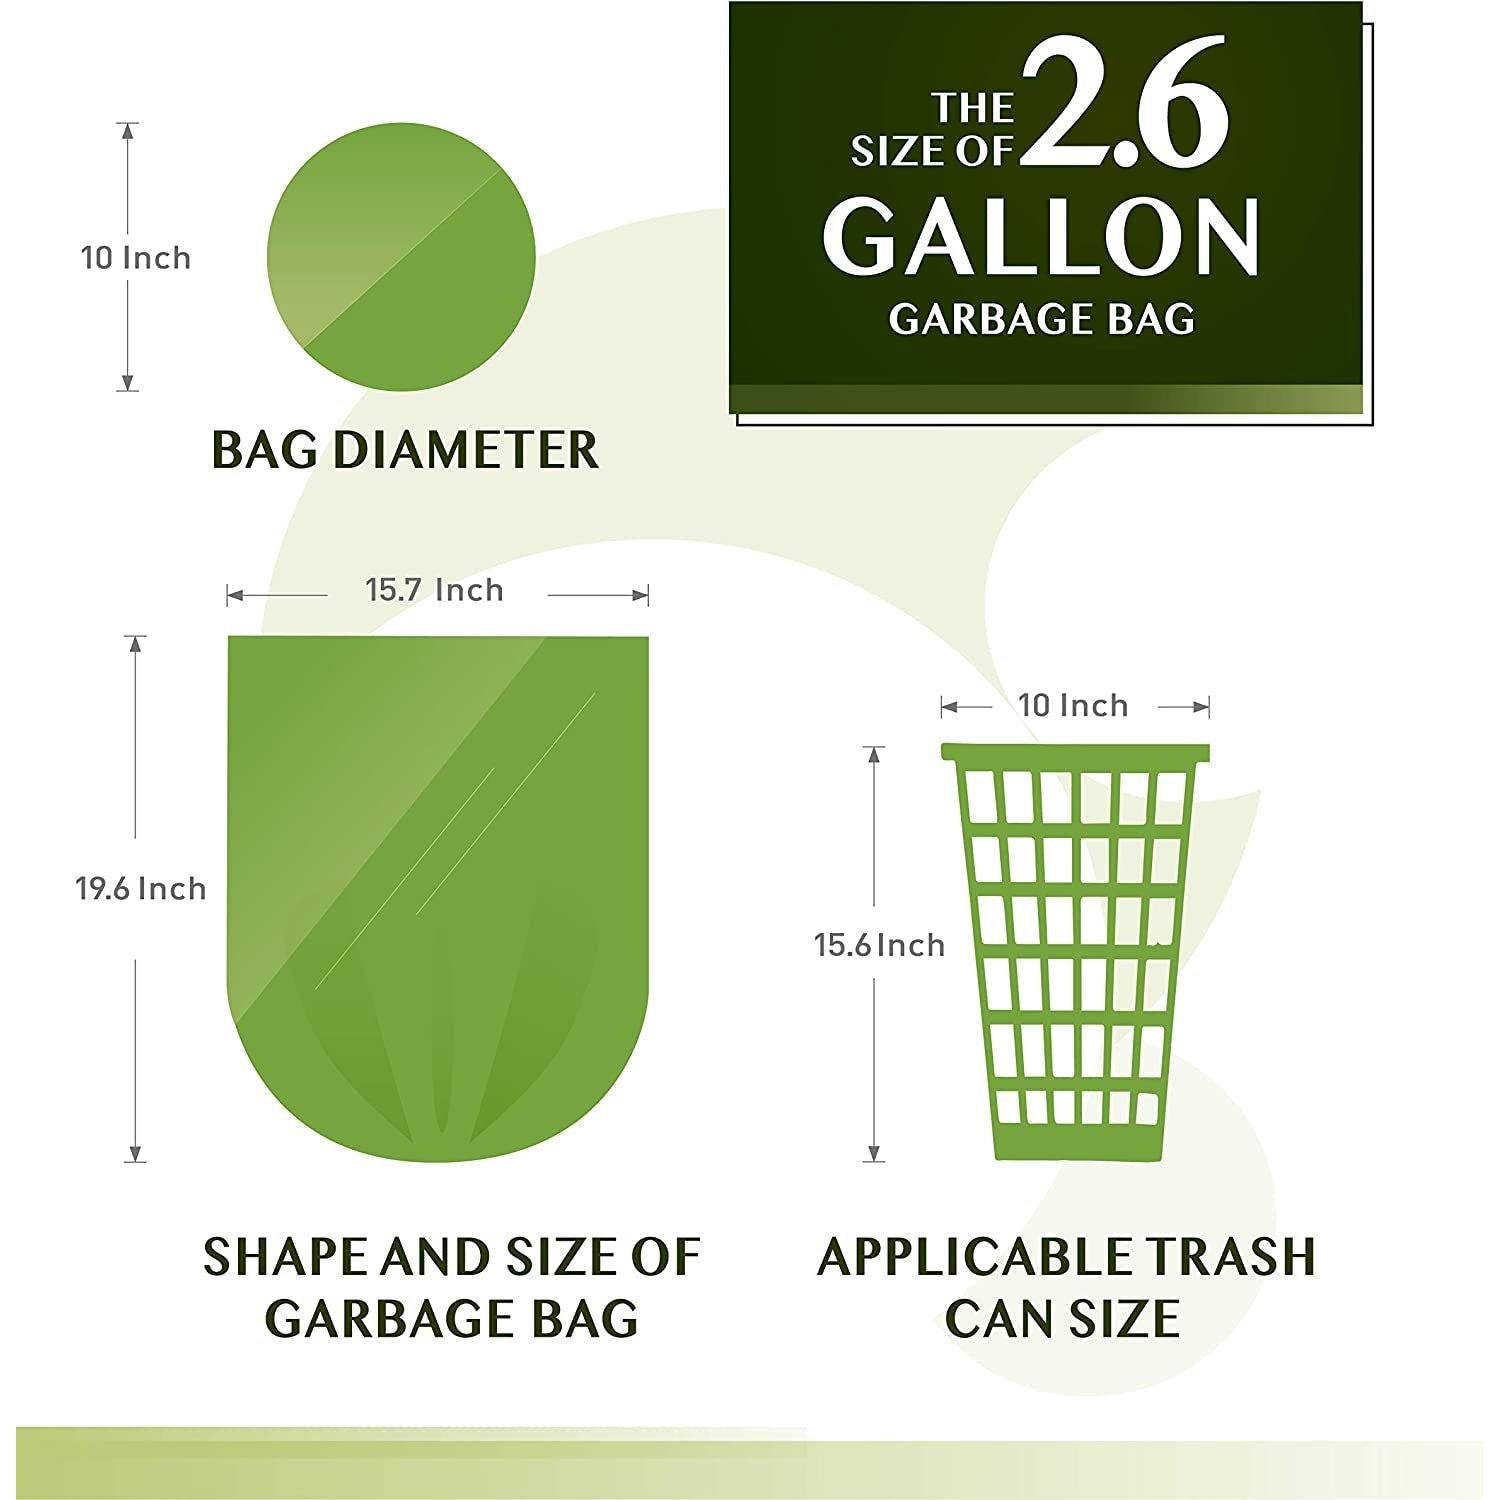 Small Trash Bags -  2.6 Gallon Compostable Garbage Bags 150 Count Mini Strong Trash Can Liners 10 Liter Unscented Wastebasket Bags for Kitchen Bathroom Home Office (5Rolls/Green)